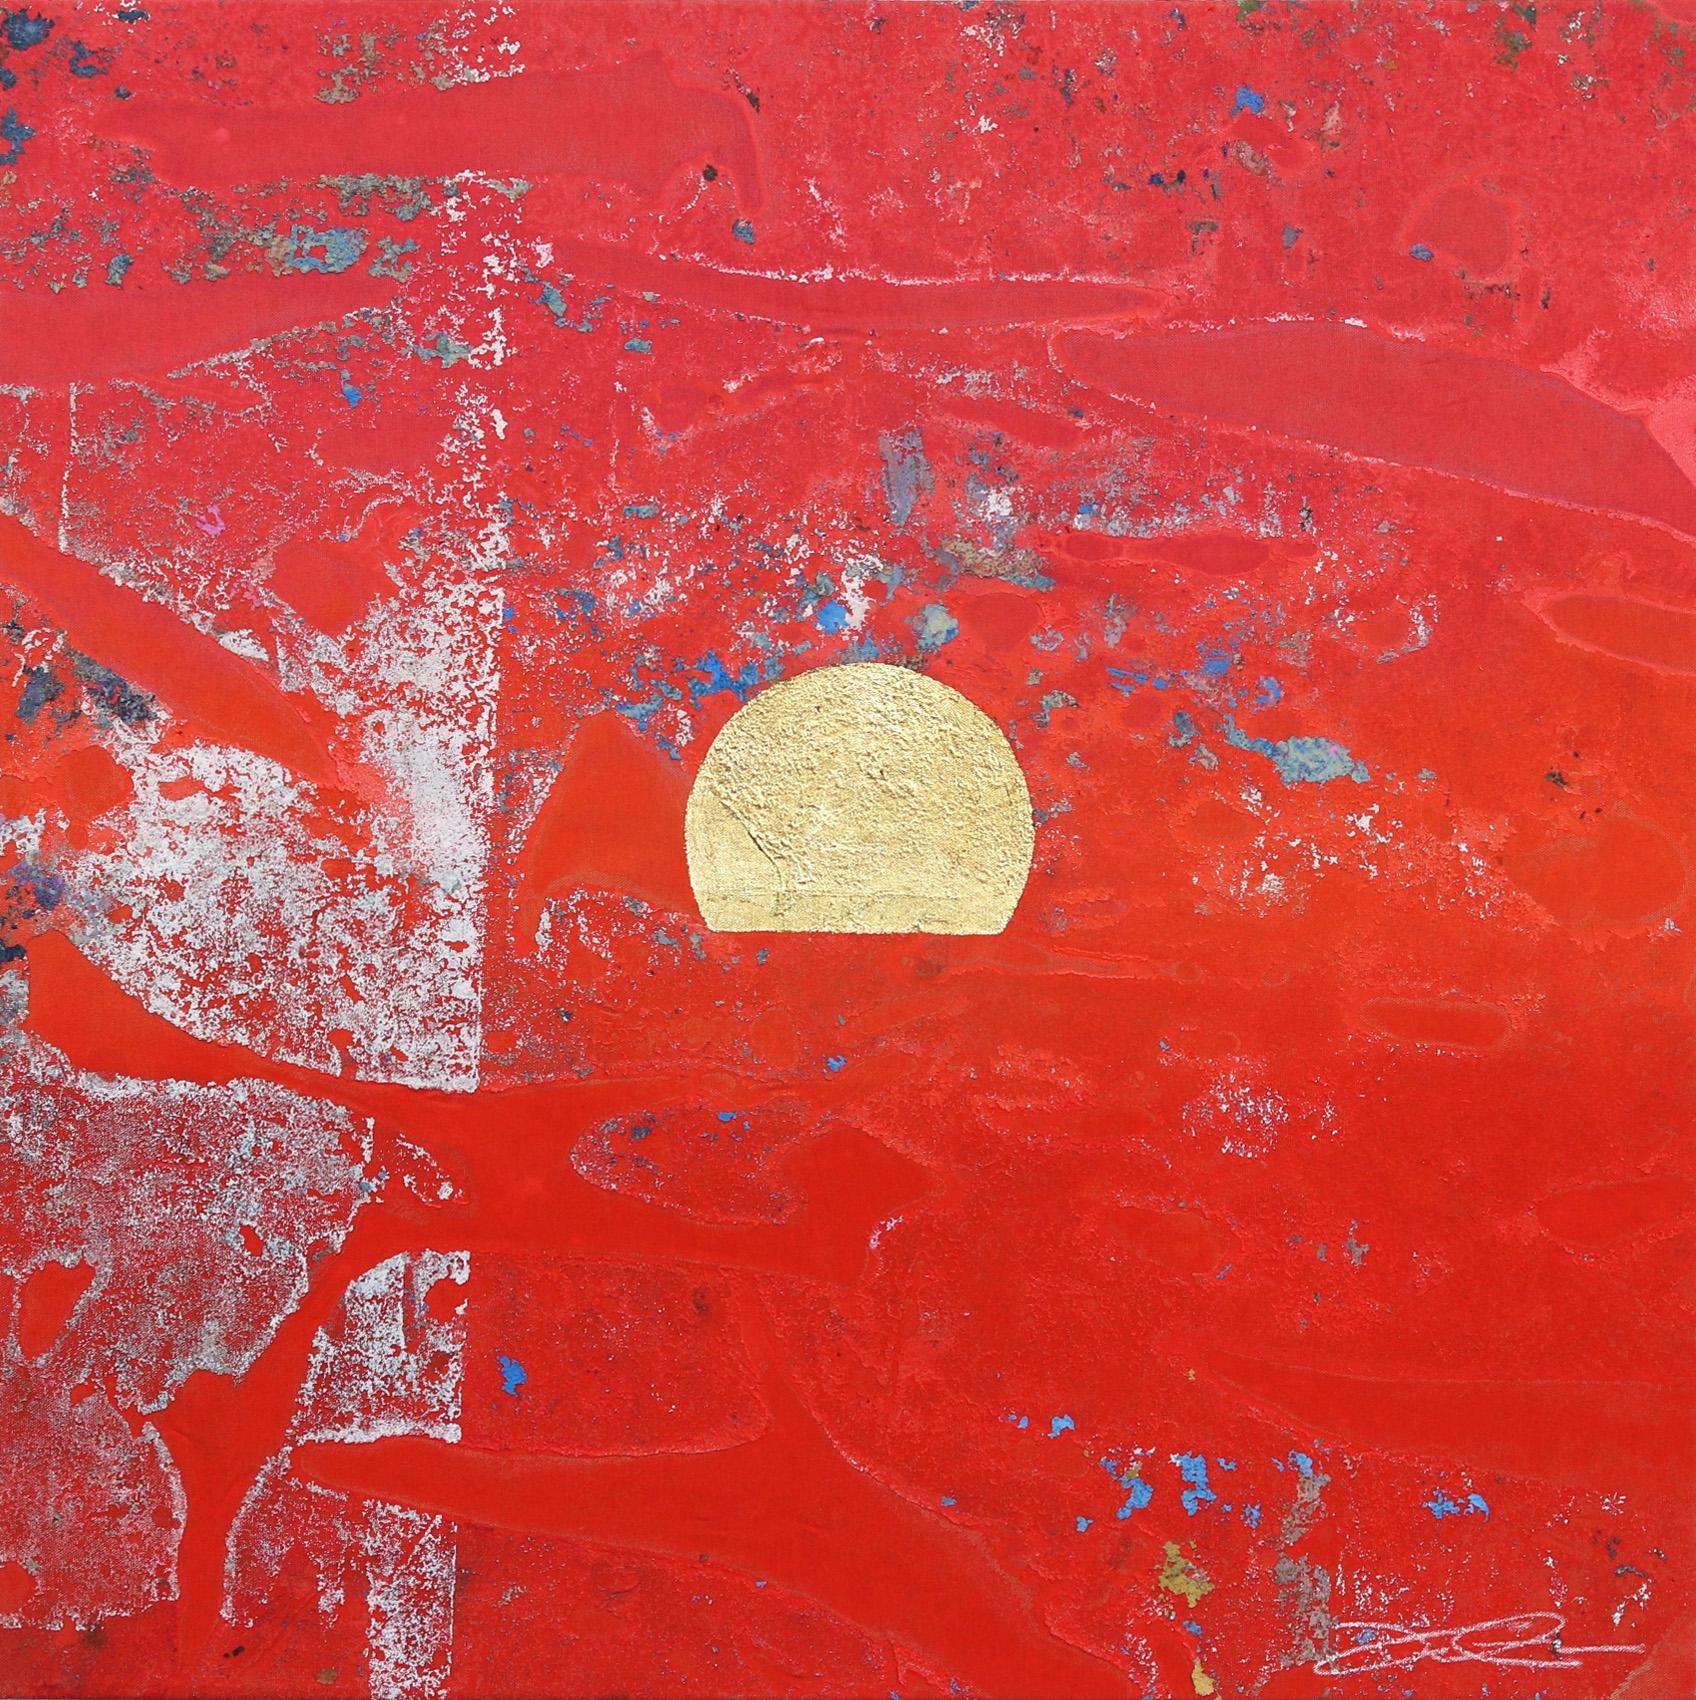 Concrete Sunset 1 - Bold Meditative Gold Leaf Red Painting on Linen Canvas - Art by Jason DeMeo